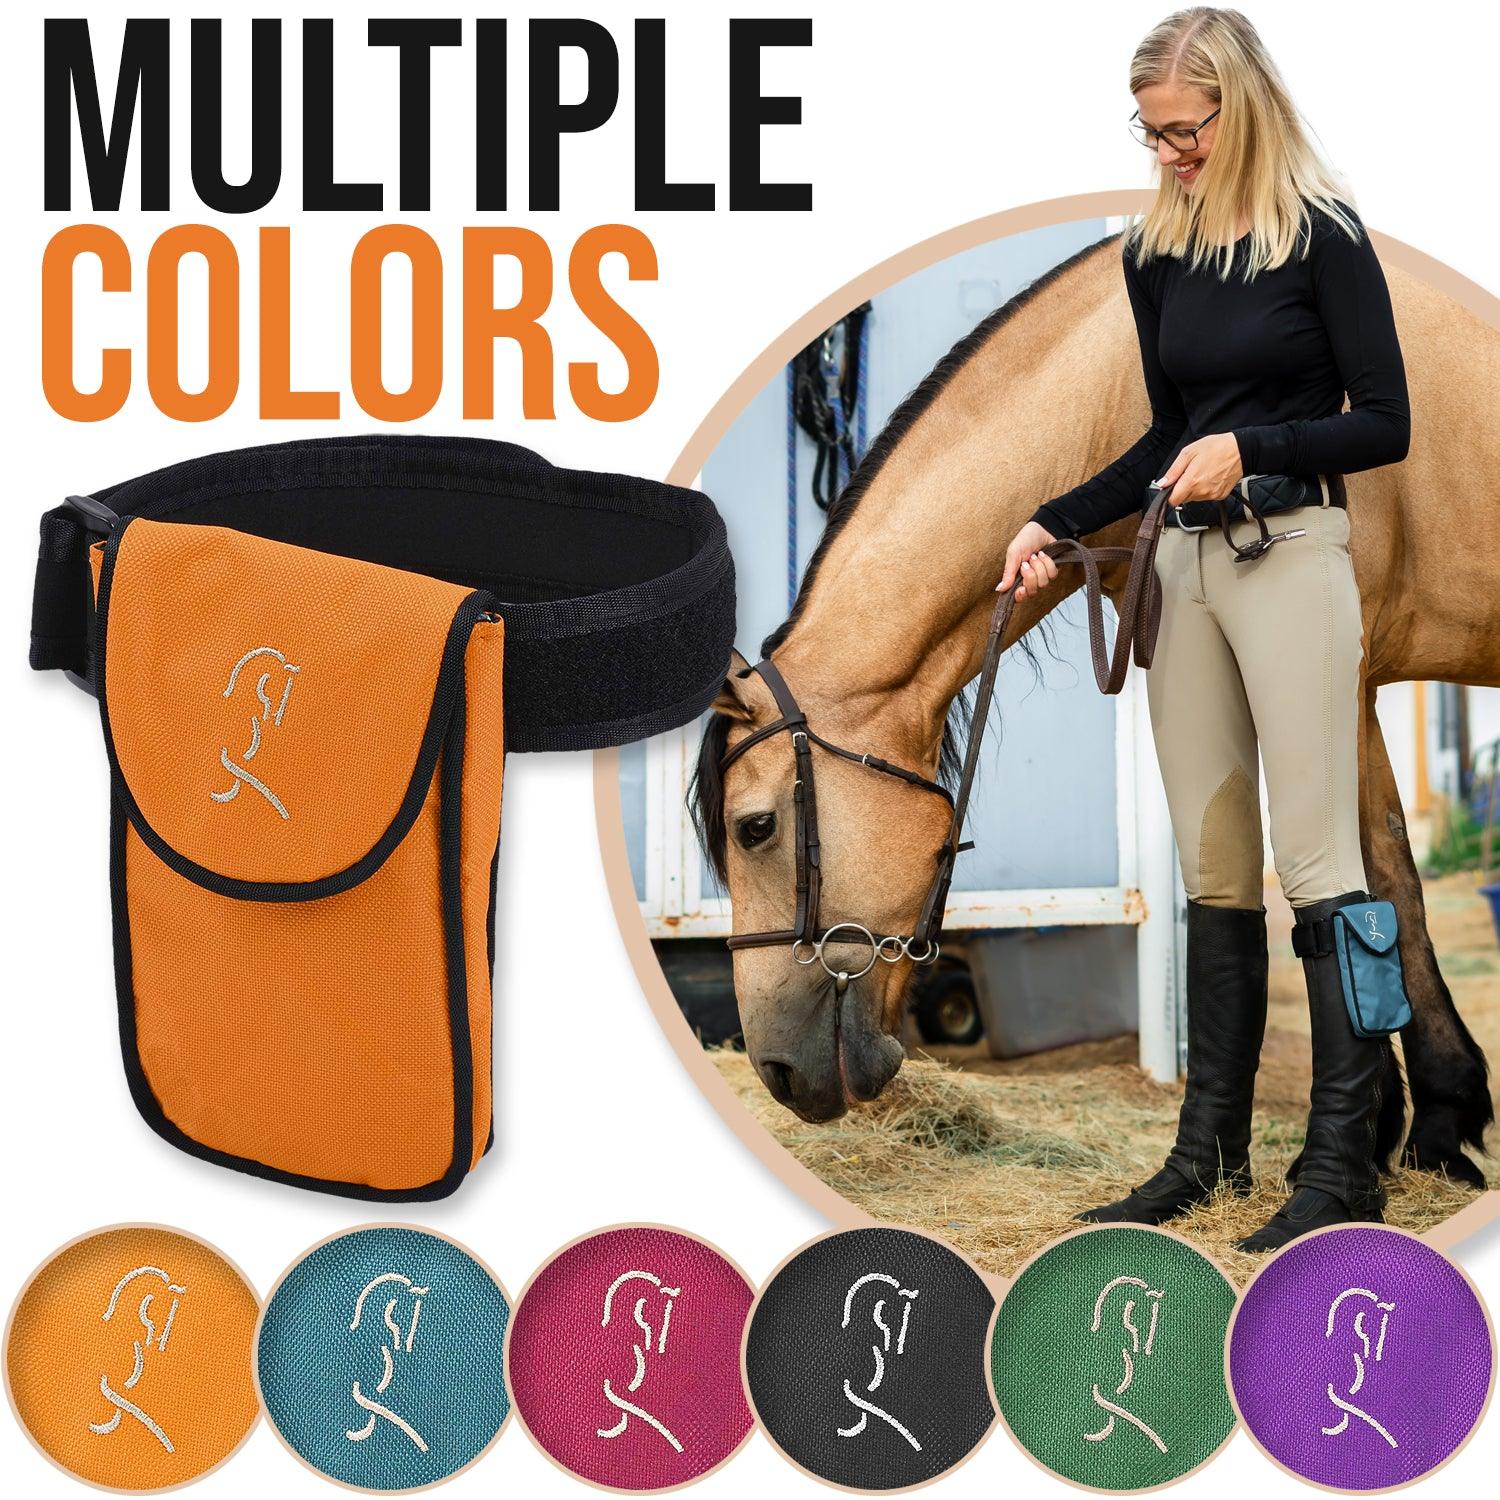 Orange horse cell phone holder shown with a variety of colors